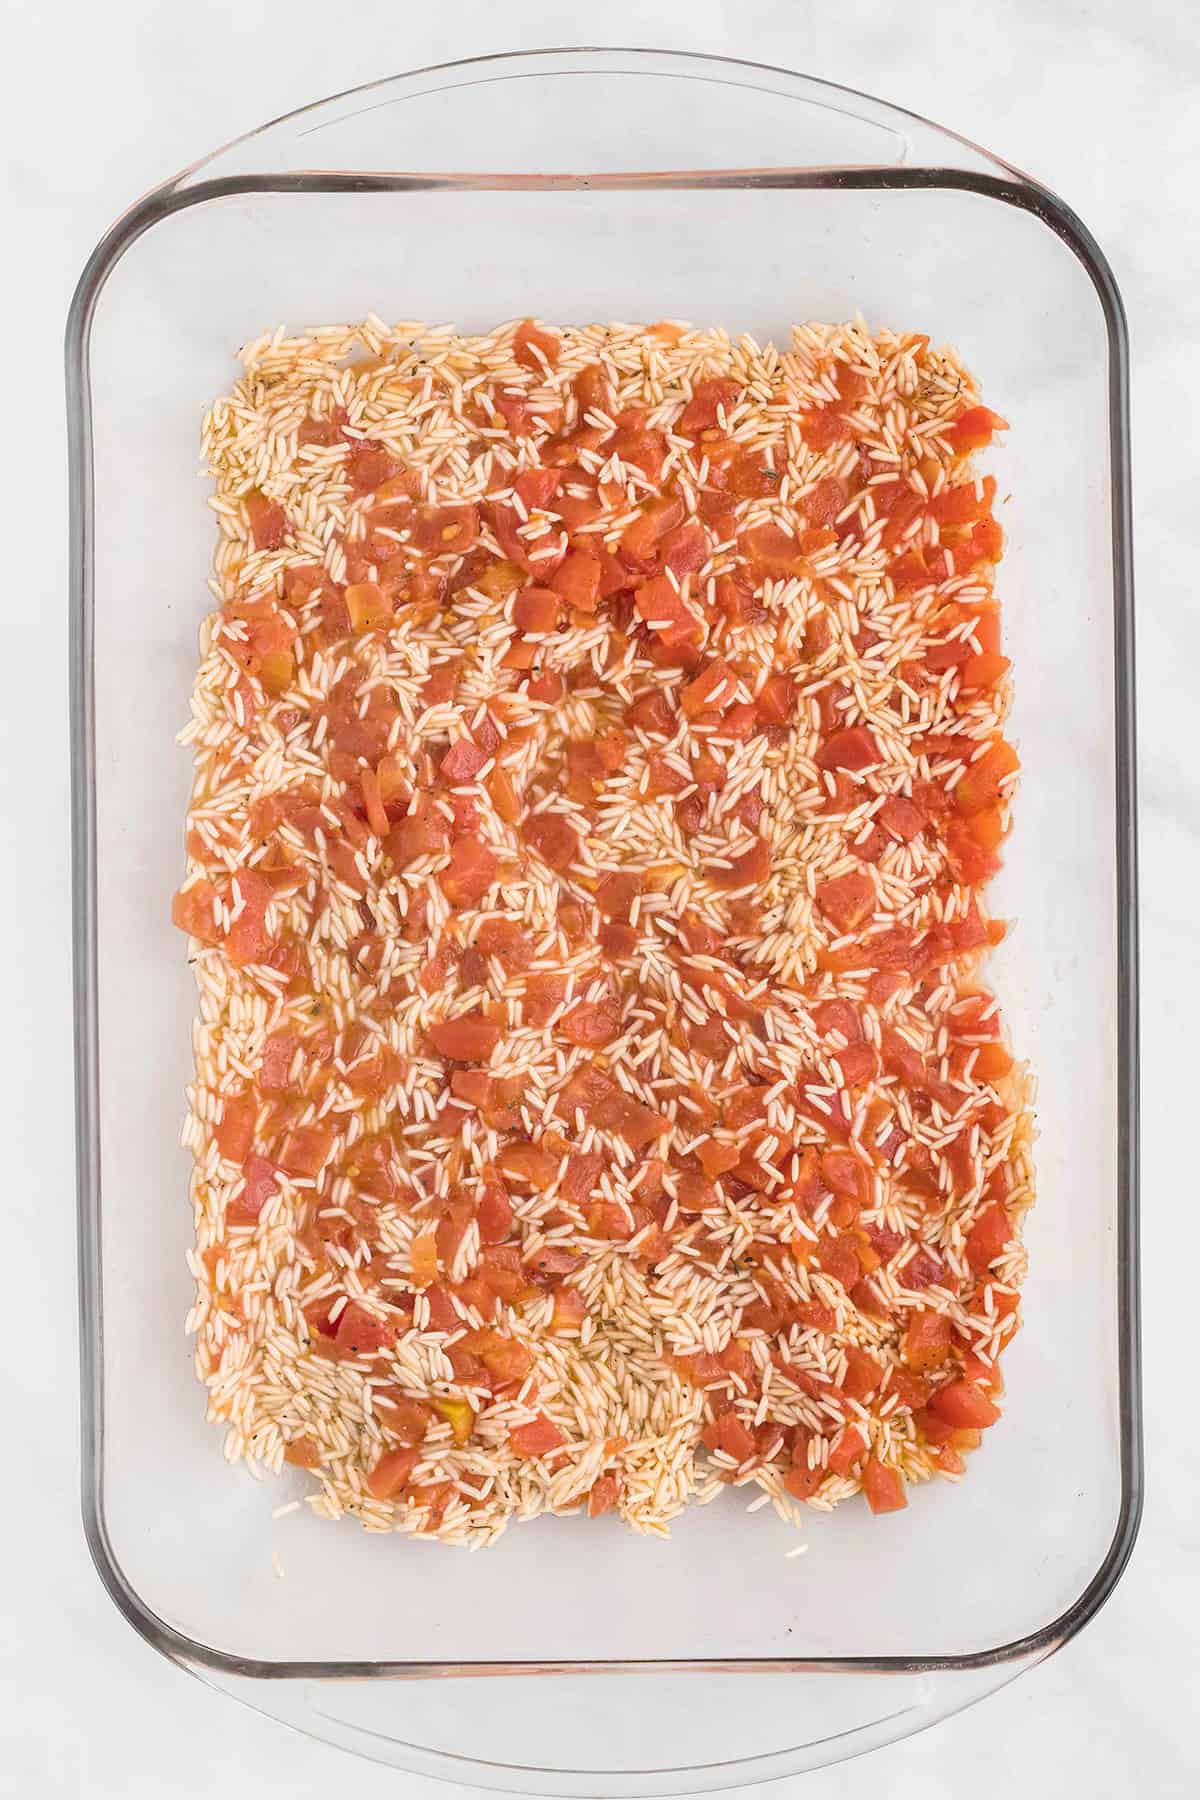 Rice and tomato mixture in a glass baking dish.